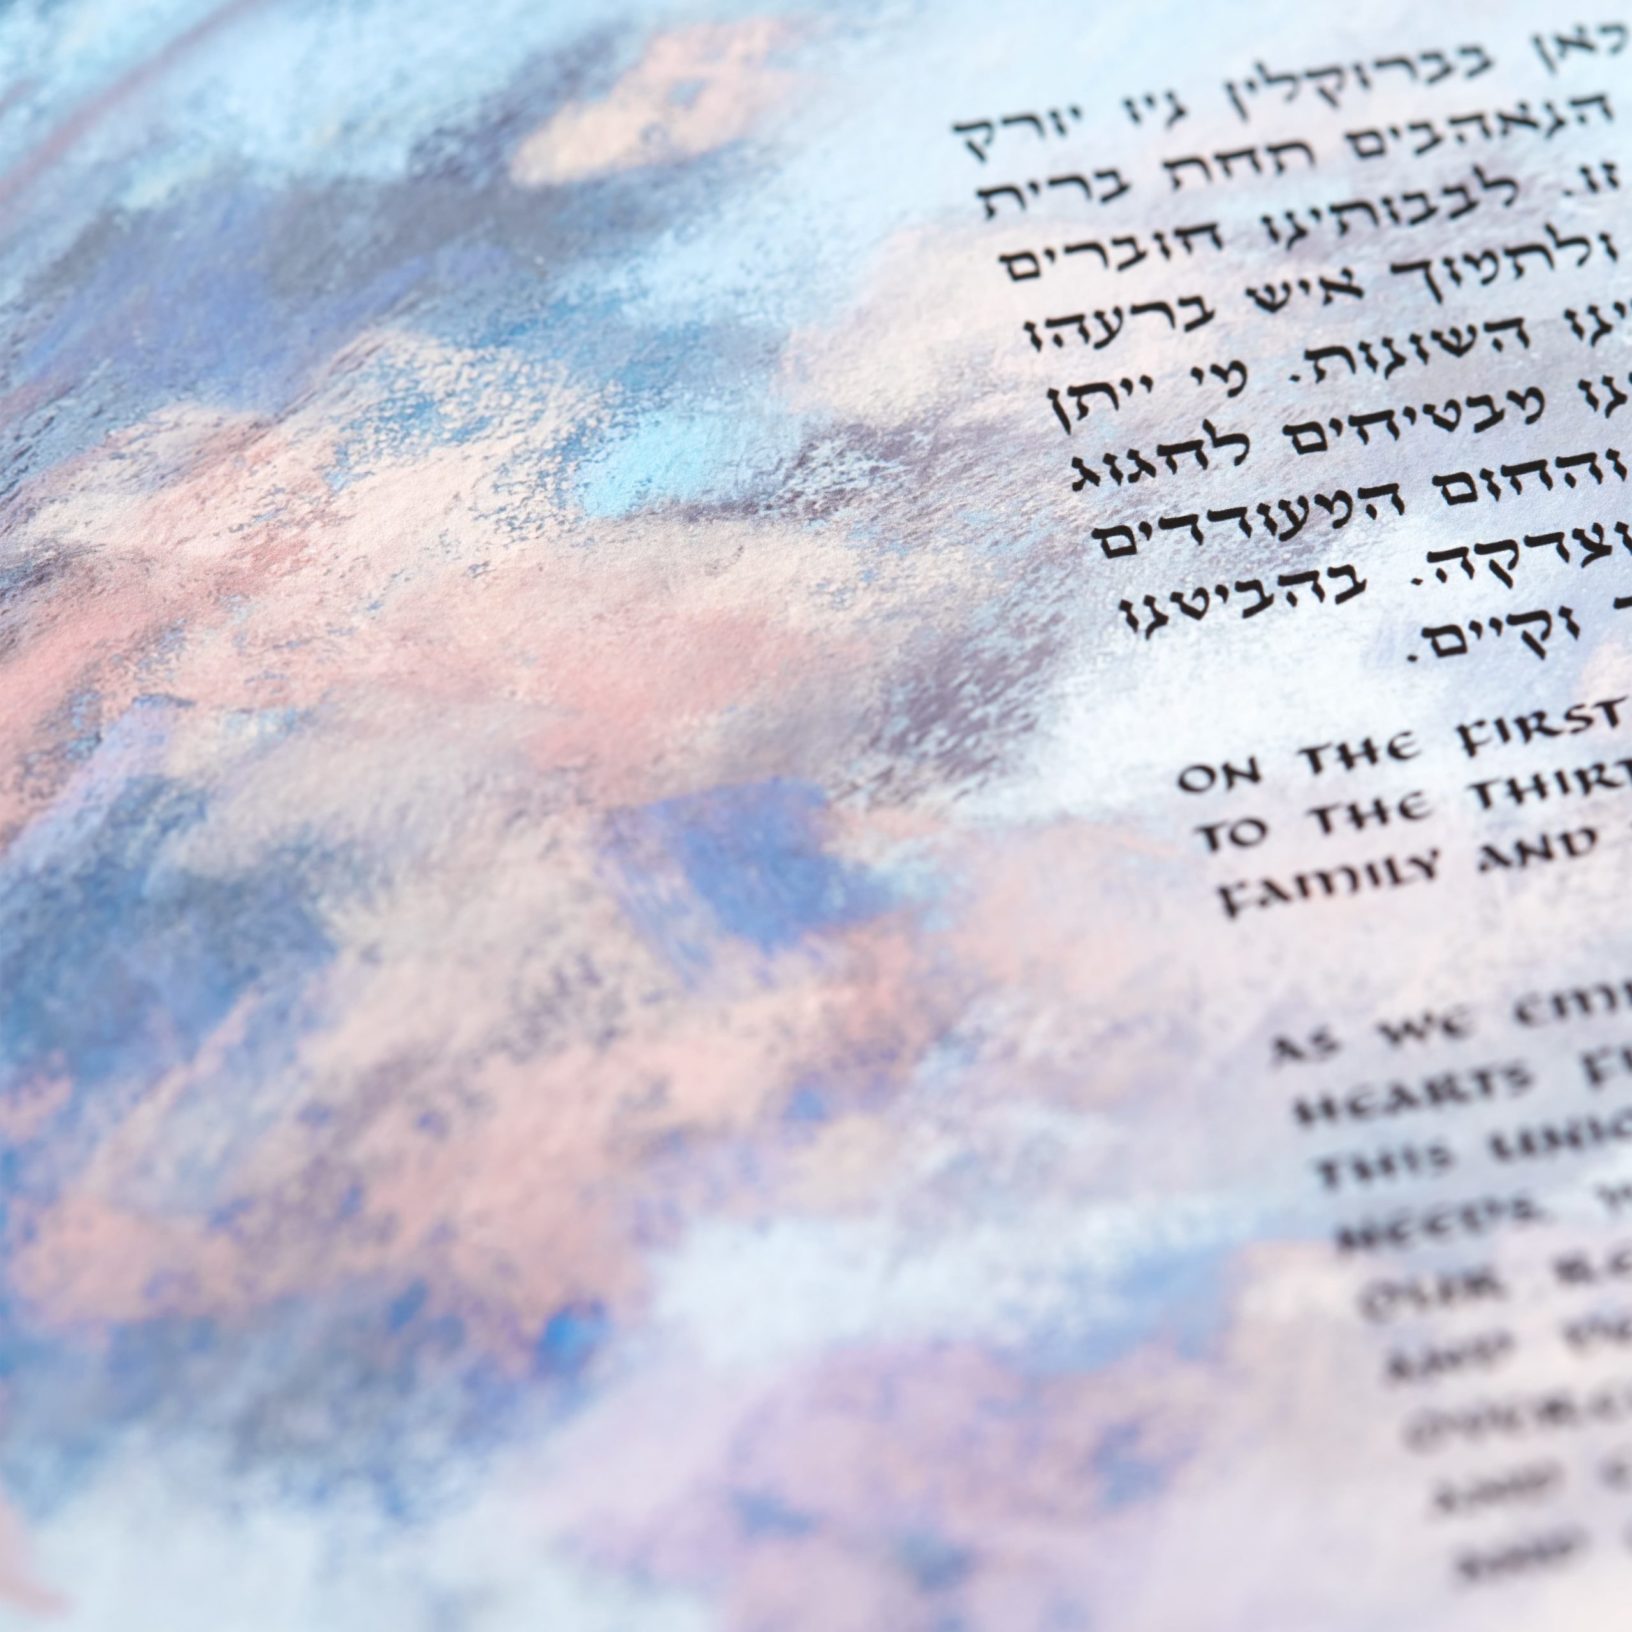 New Dawn Ketubah Marriage Contracts by Susan Cone Porges